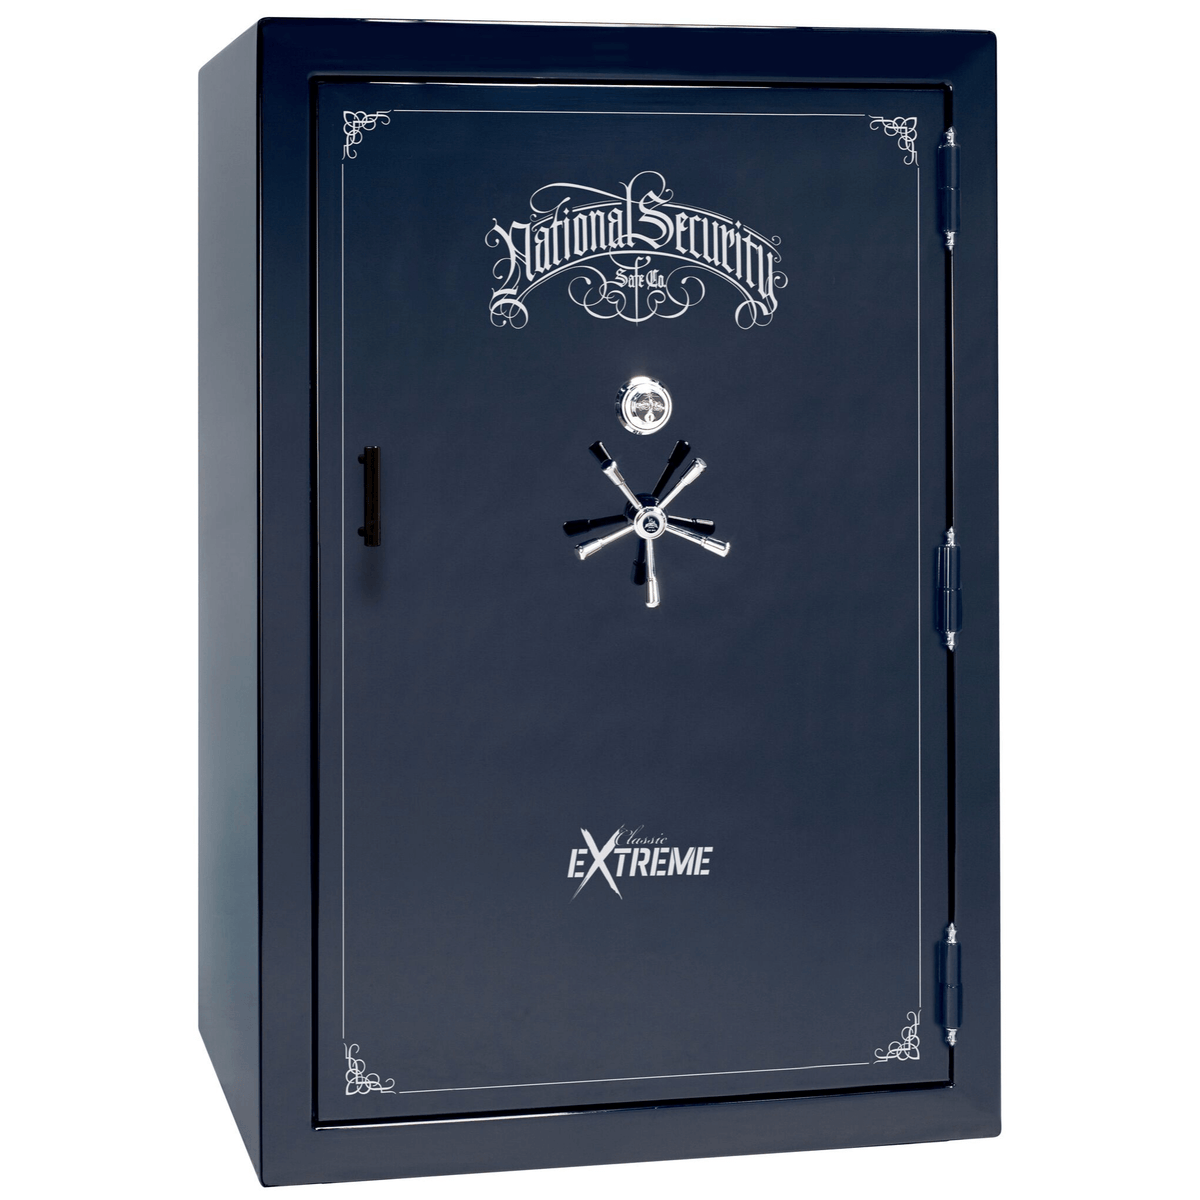 Liberty Classic Select Extreme Wide Body Safe in Blue Gloss with Chrome Mechanical Lock.